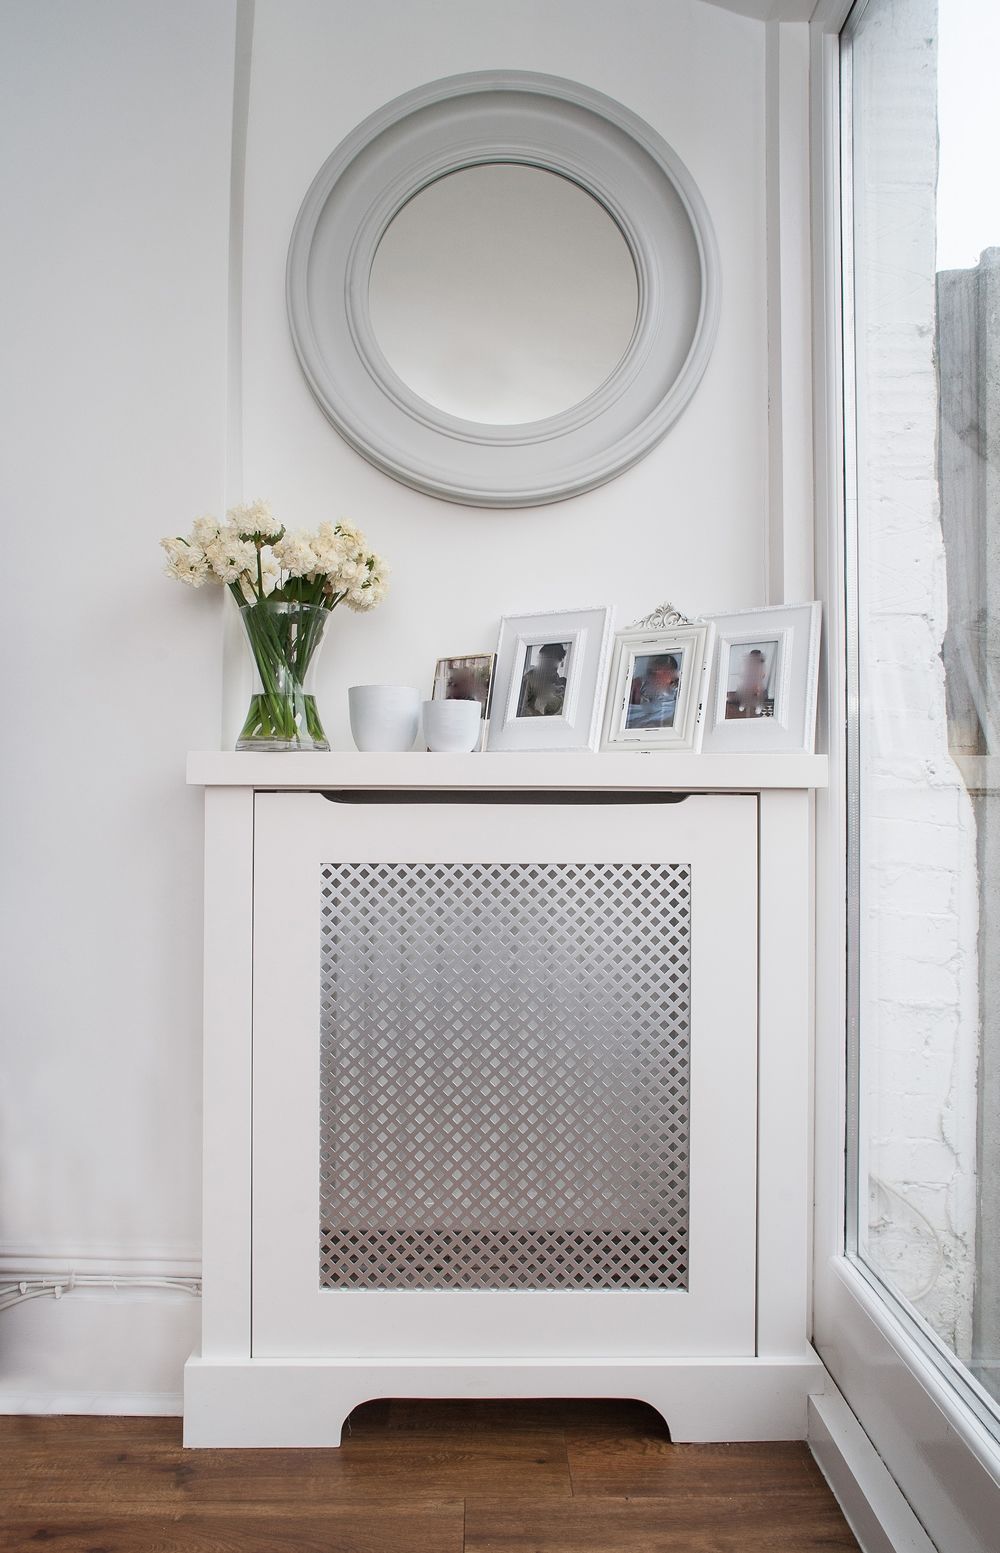 Bespoke Classic And Contemporary Radiator Covers London Alcove Within Radiator Cover With Bookcase Above (View 7 of 15)